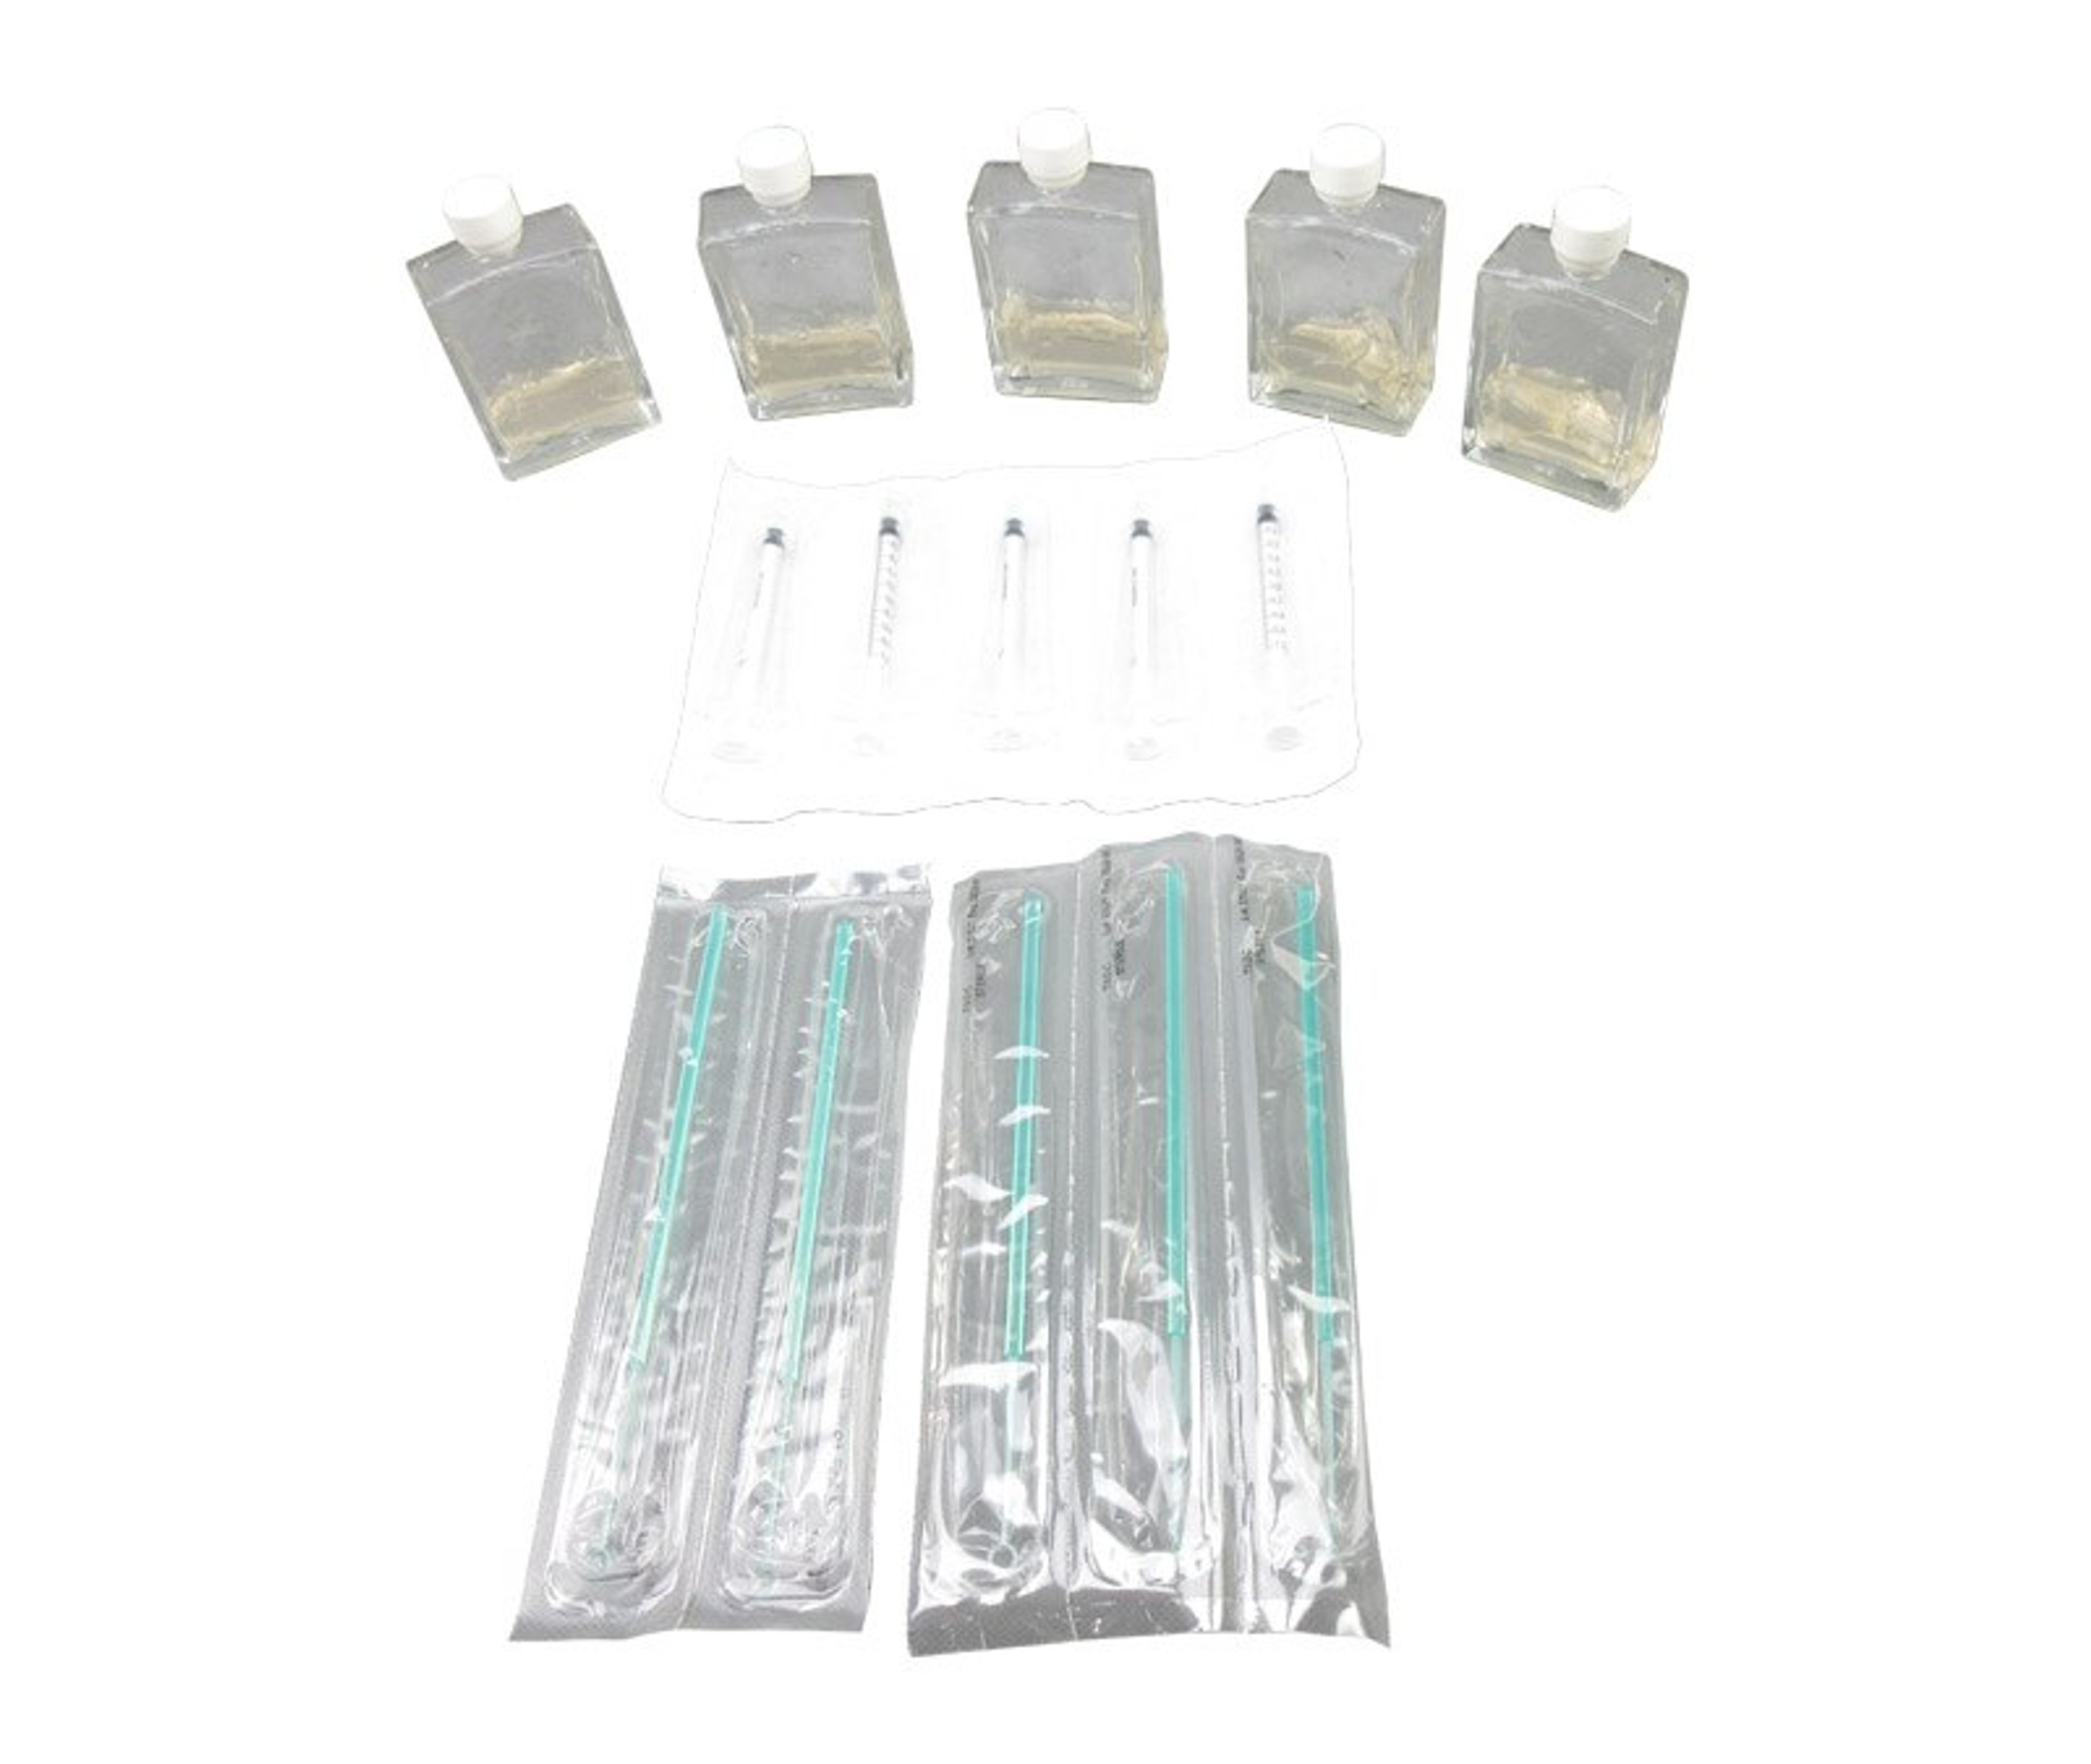 FQS FQS-035 MicrobMonitor2 Fuel Microbial Growth Detector Kit at ...